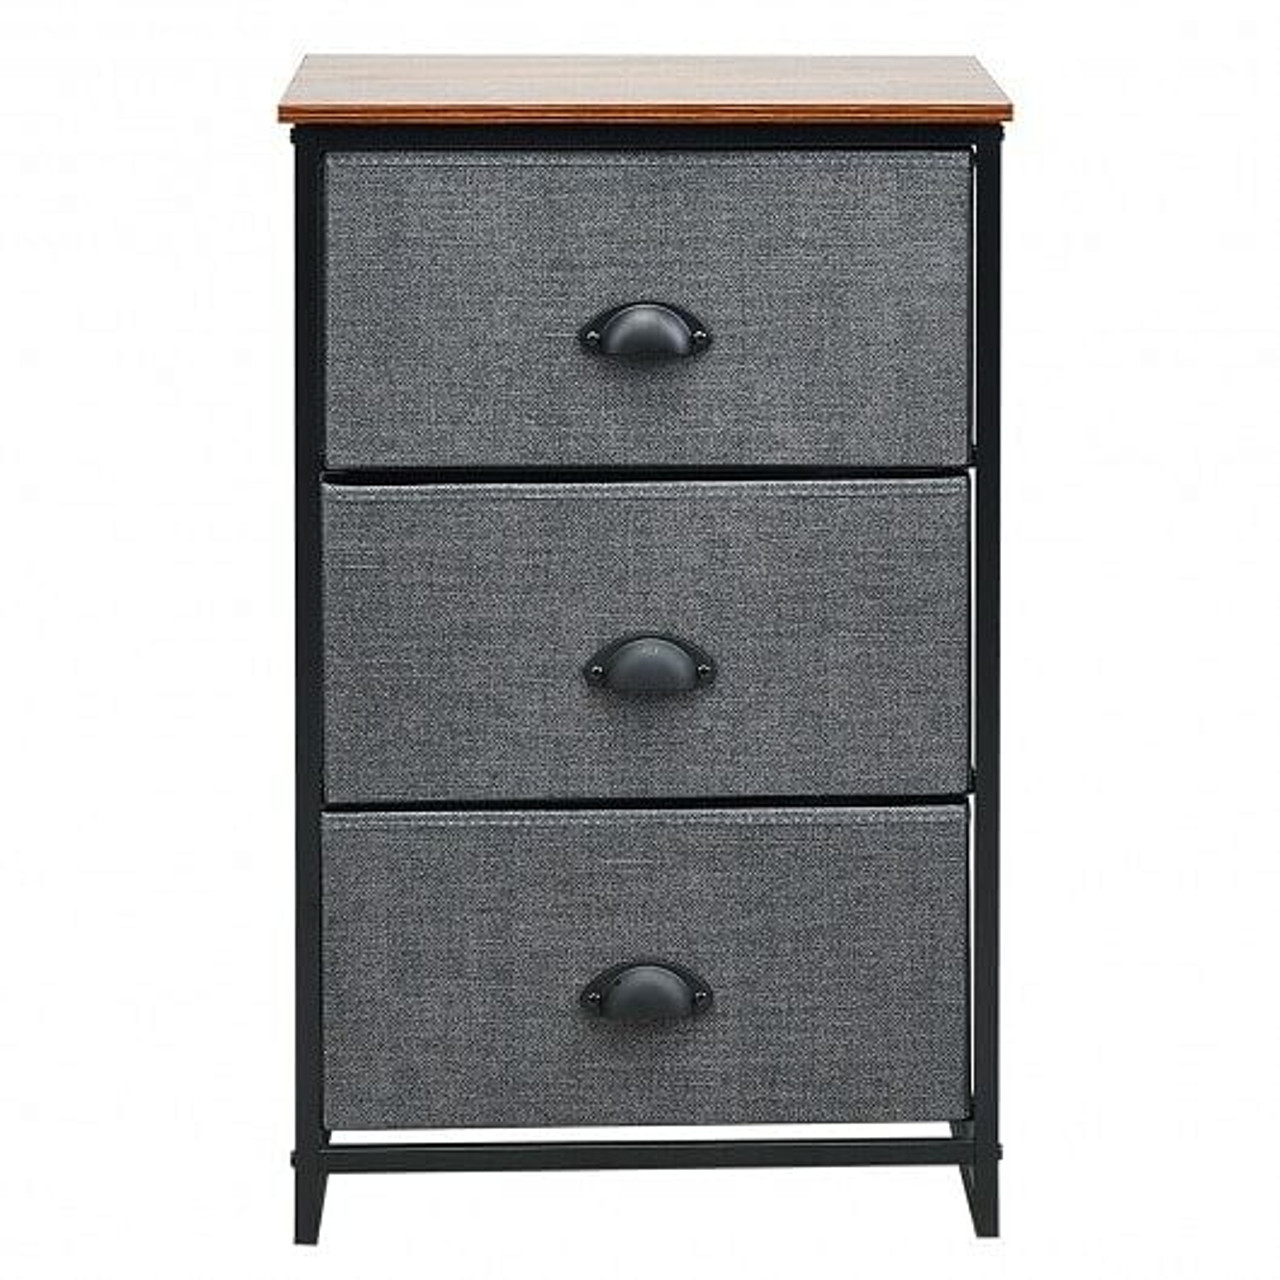 Nightstand Side Table Storage Tower Dresser Chest with 3 Drawers-Gray